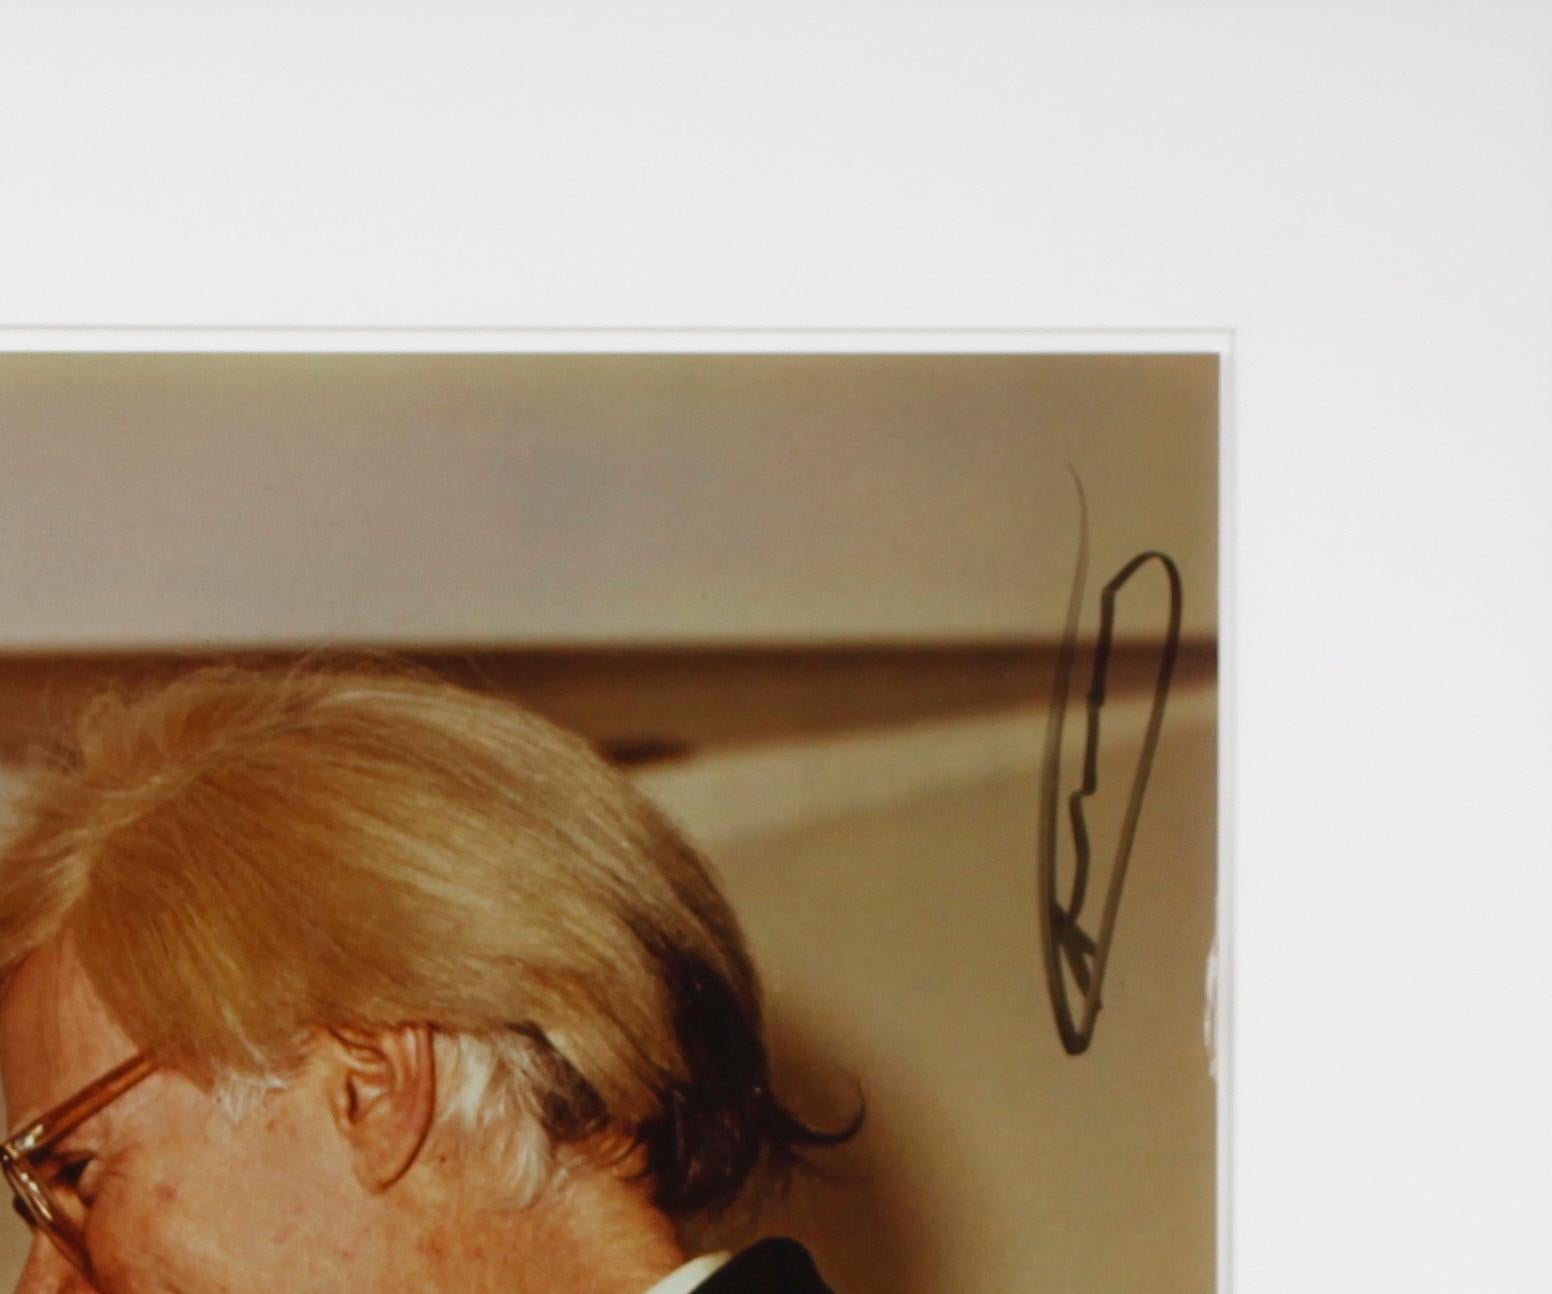 Andy Warhol, photography by ZOA, signed by Andy Warhol and ZOA, colour print 1